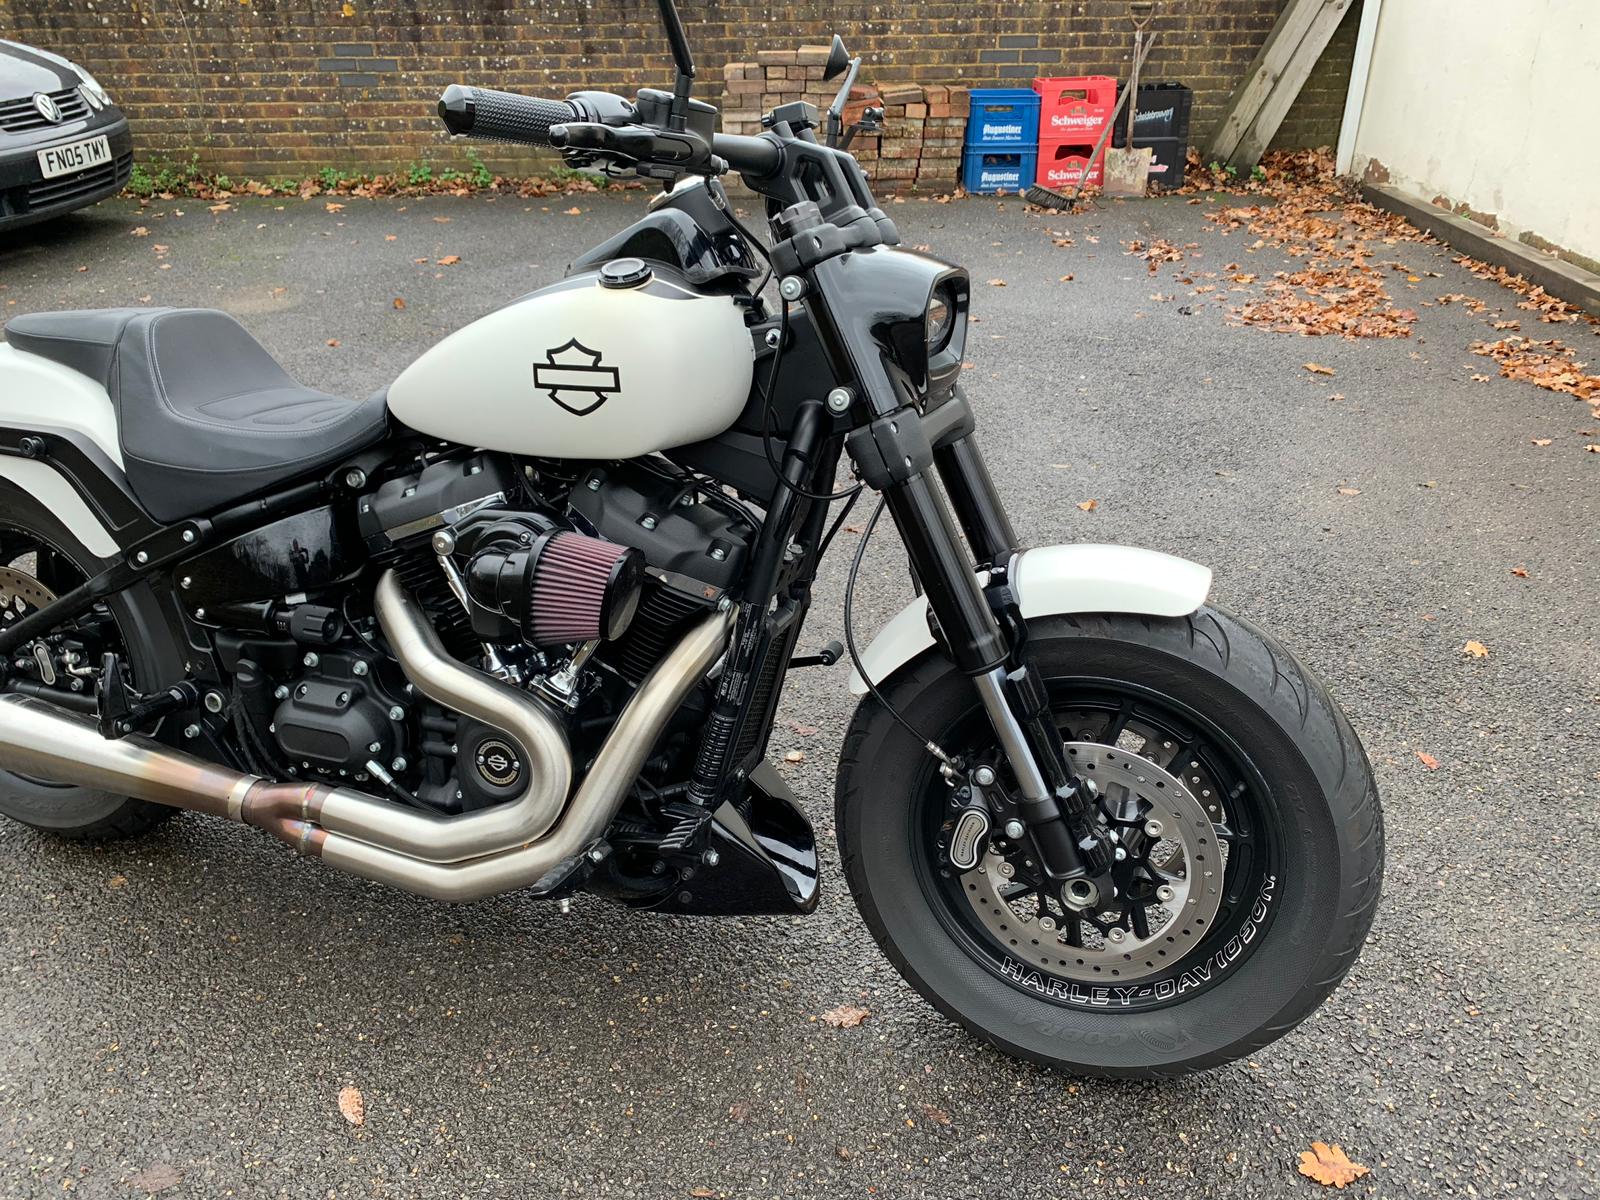 2018/19 softail chin spoiler / belly pan